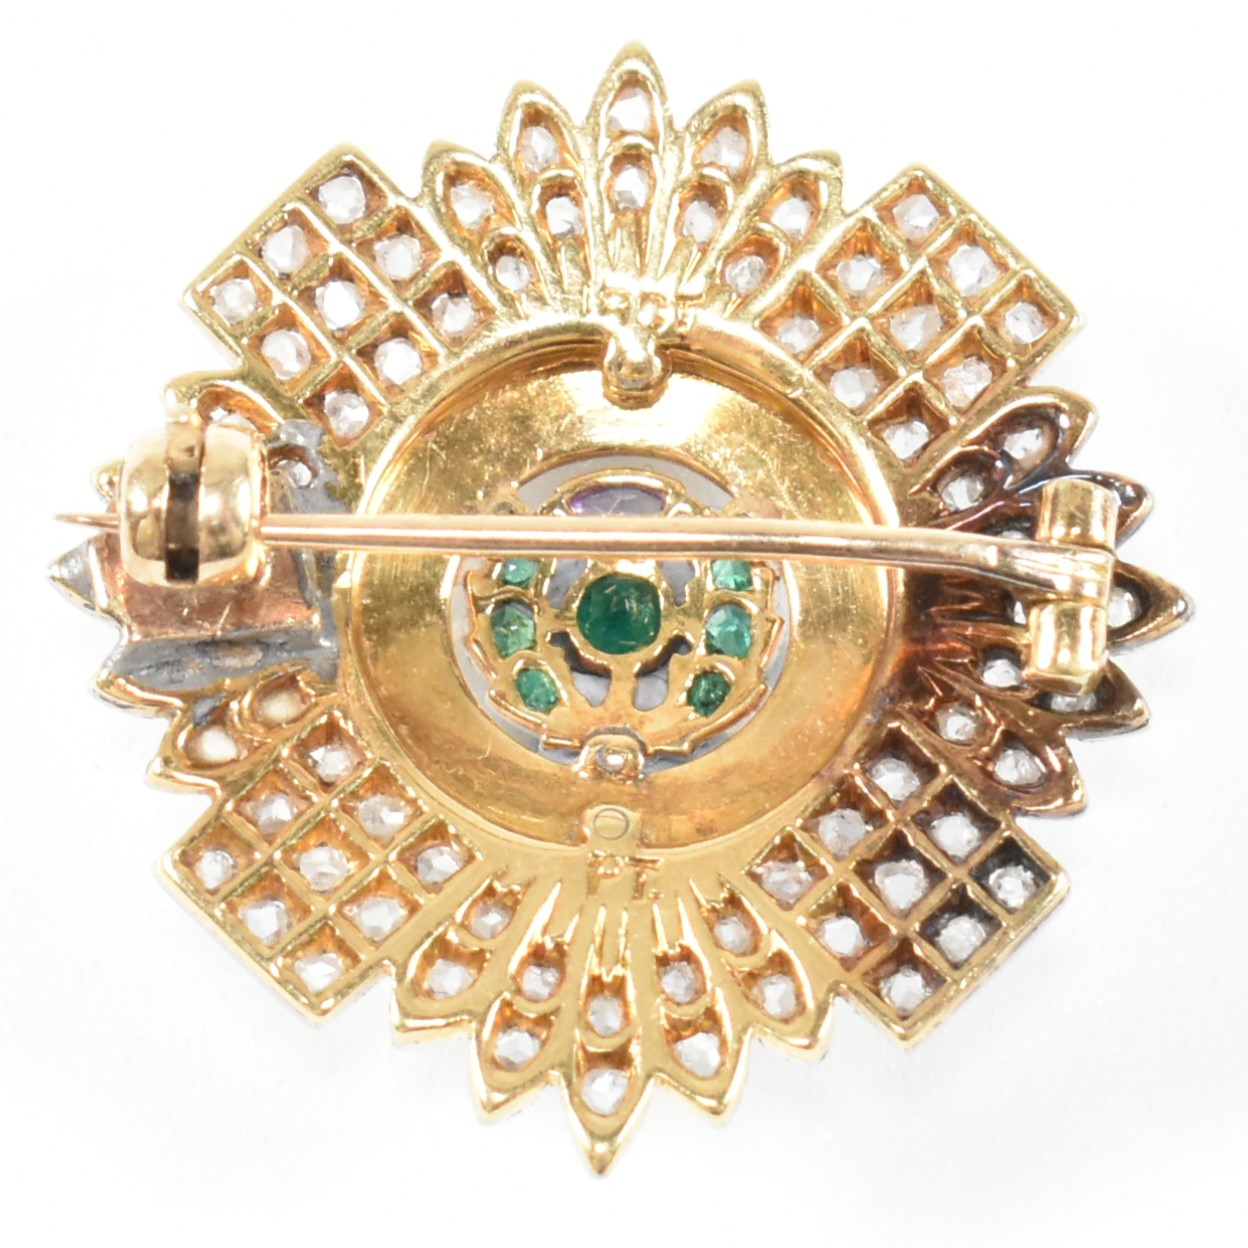 EARLY 20TH CENTURY SCOTS GUARDS SWEETHEART BROOCH - Image 2 of 8